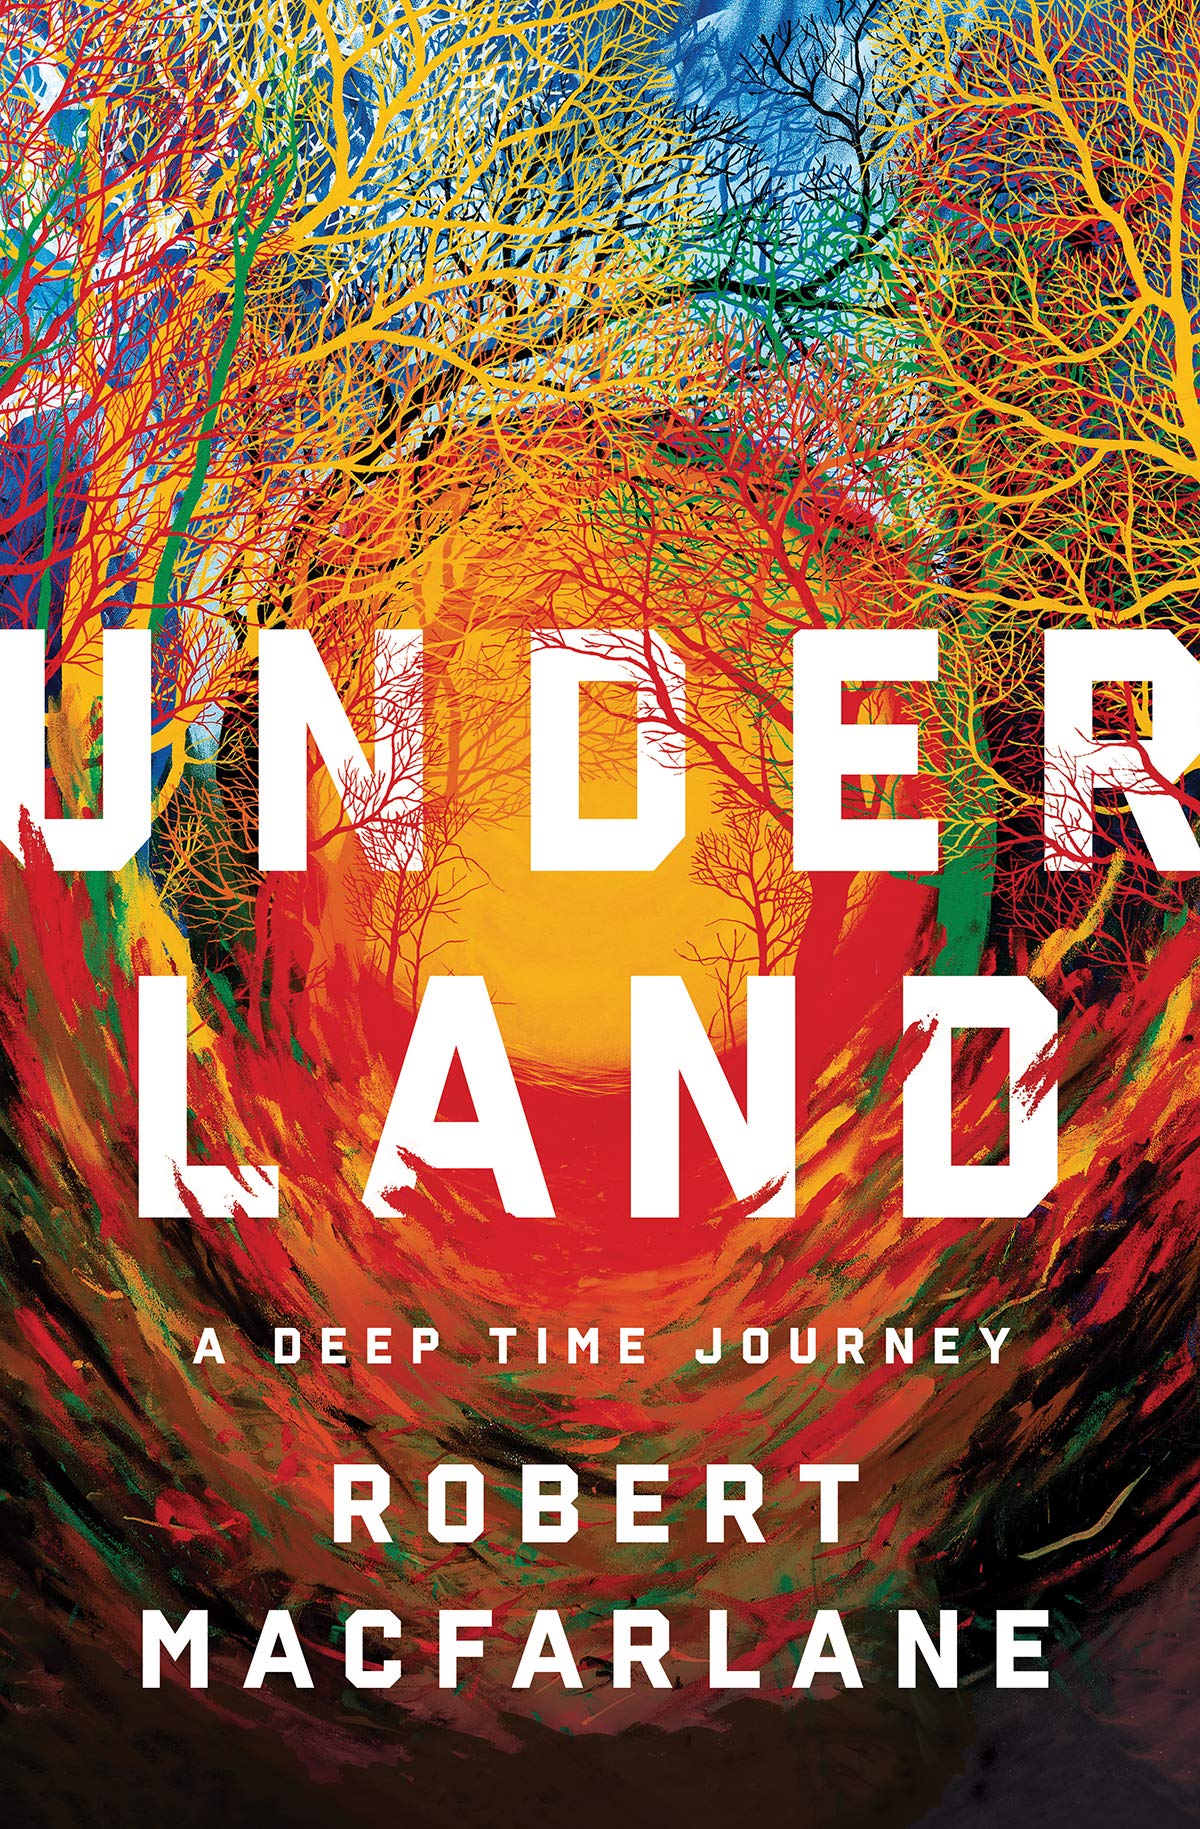 book cover with blue to orange ombre background with the title Underland by Rober Macfarlene